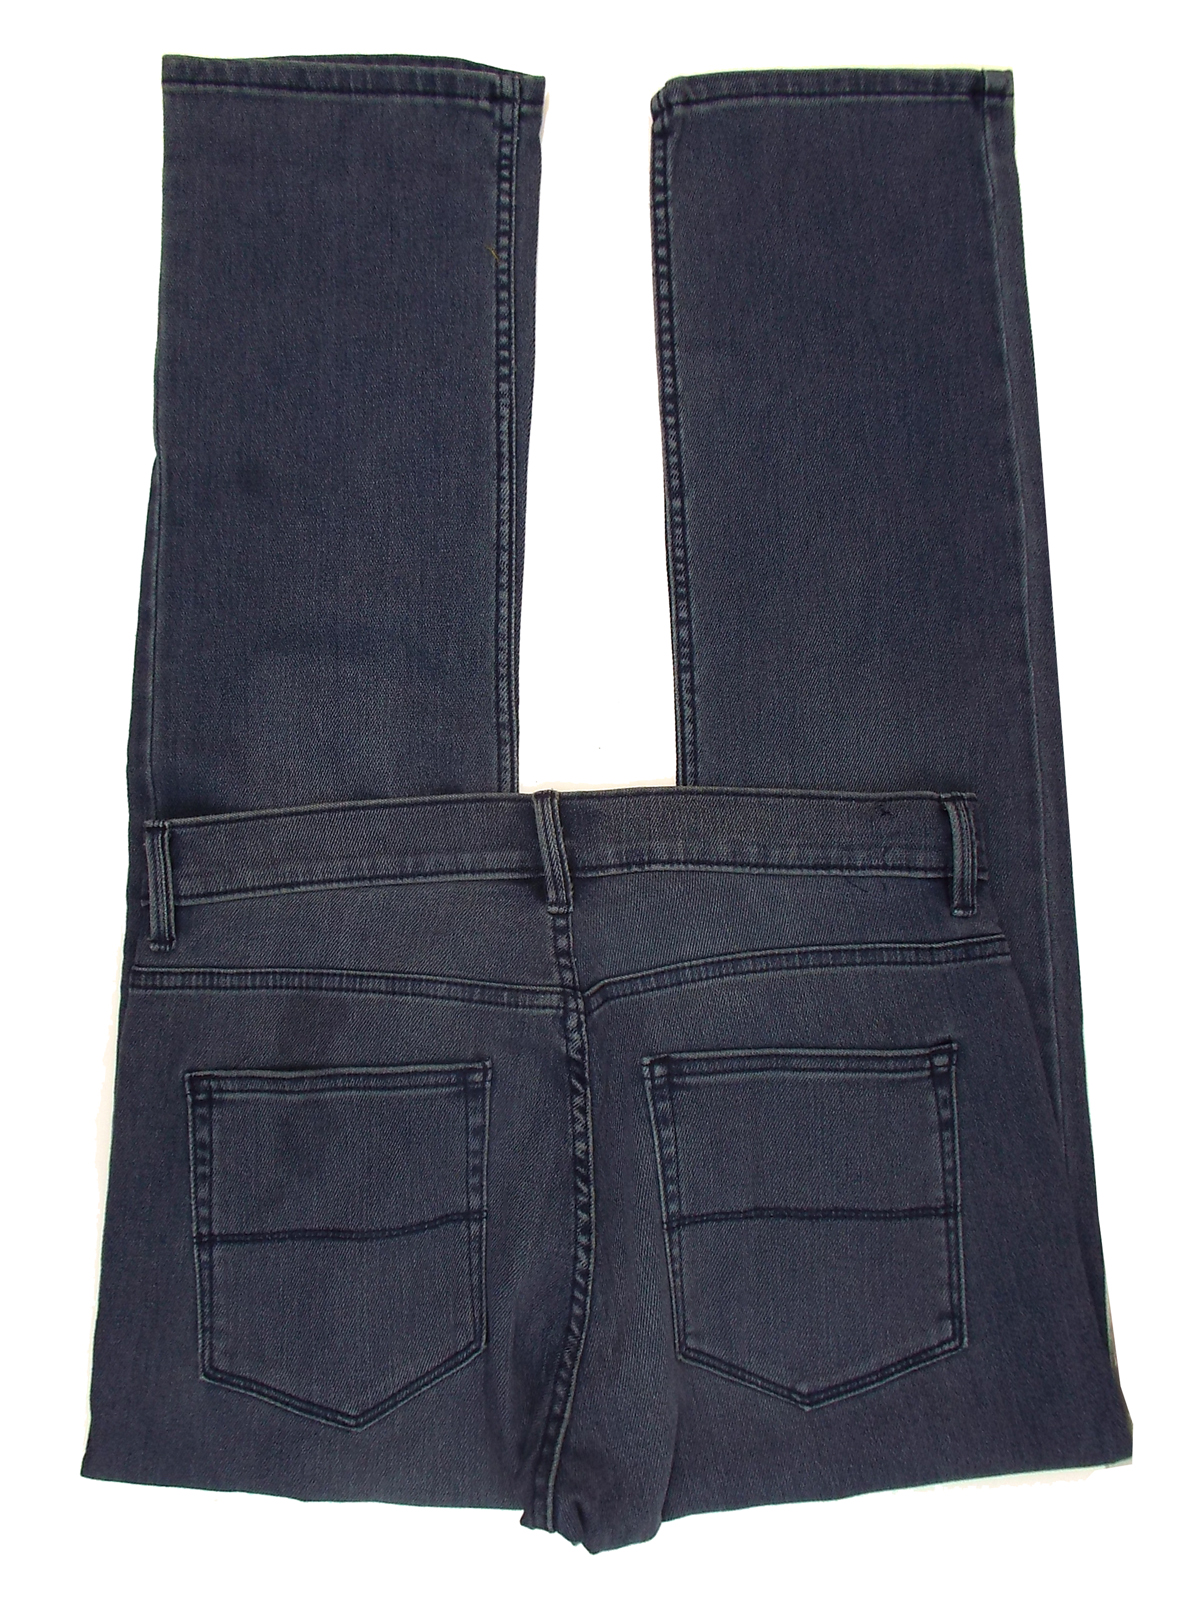 Marks and Spencer - - M&5 BLUE Straight Fit Denim Jeans - Waist Size 34 ...